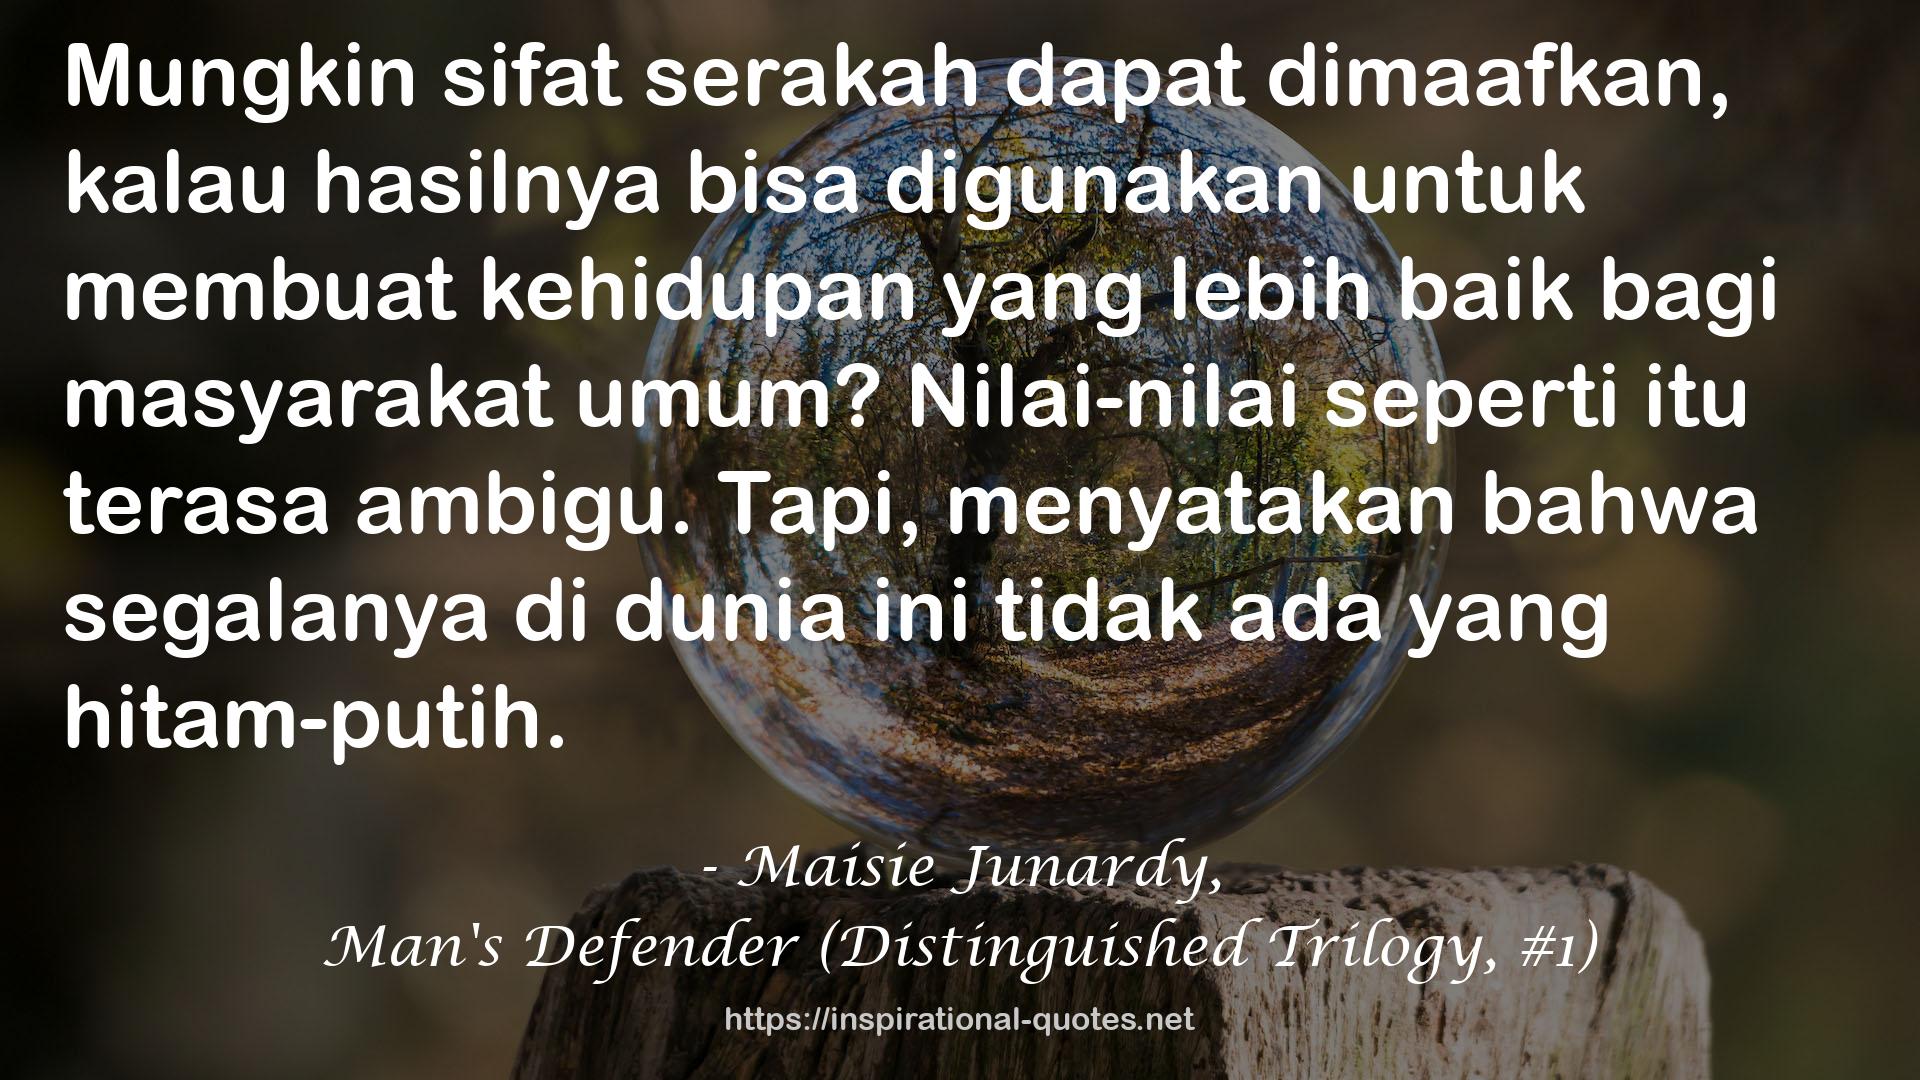 Maisie Junardy, QUOTES